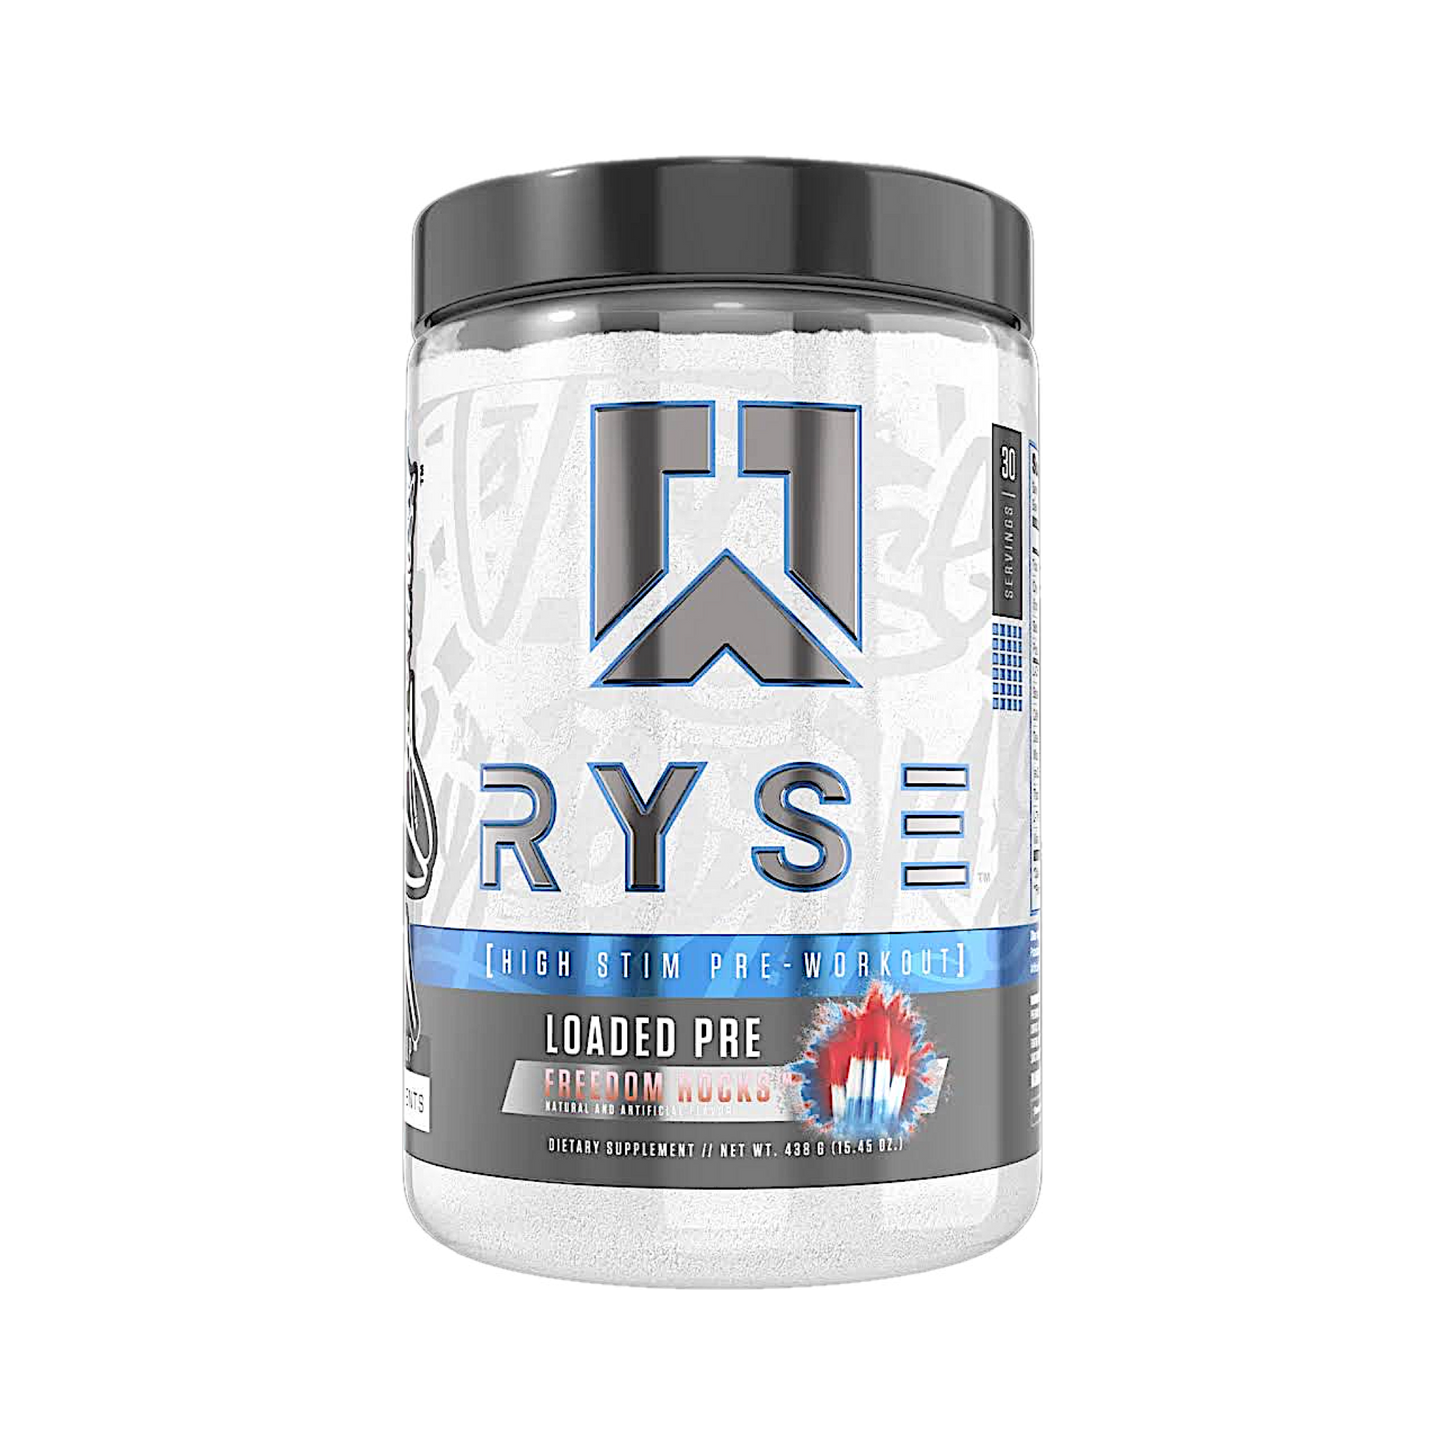 Ryse Loaded Pre-Workout